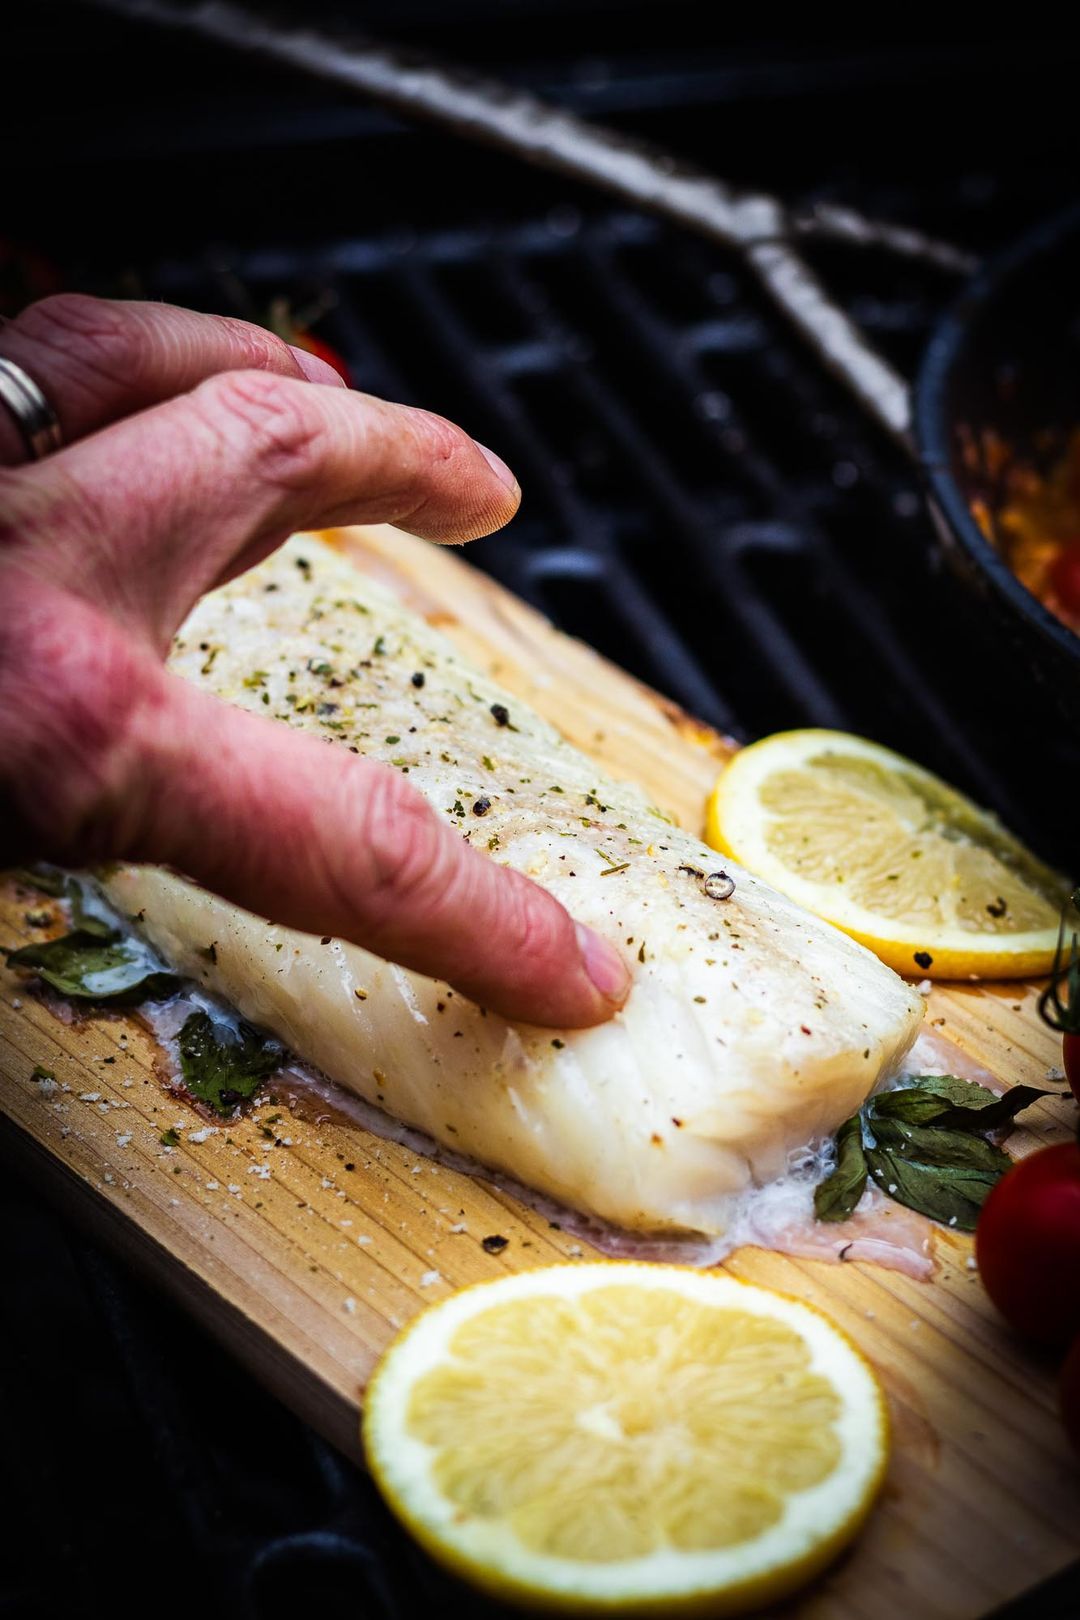 Now make this delicious cedar plank smoked cod